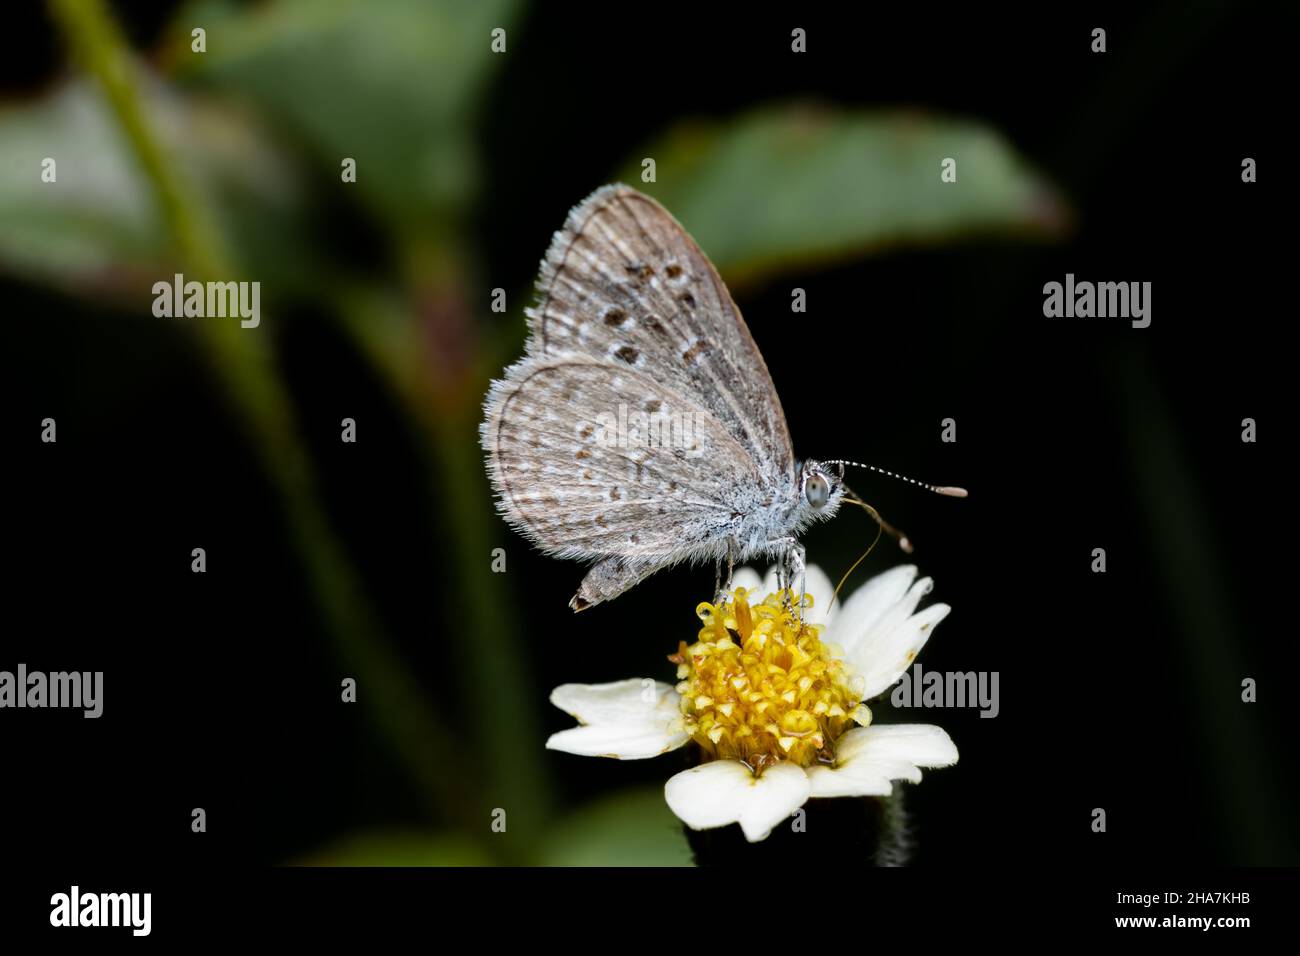 Grass blue butterfly getting nectar from Tridax flower. Details of butterfly tongue and wing scales pattern. Used selective focus. Stock Photo